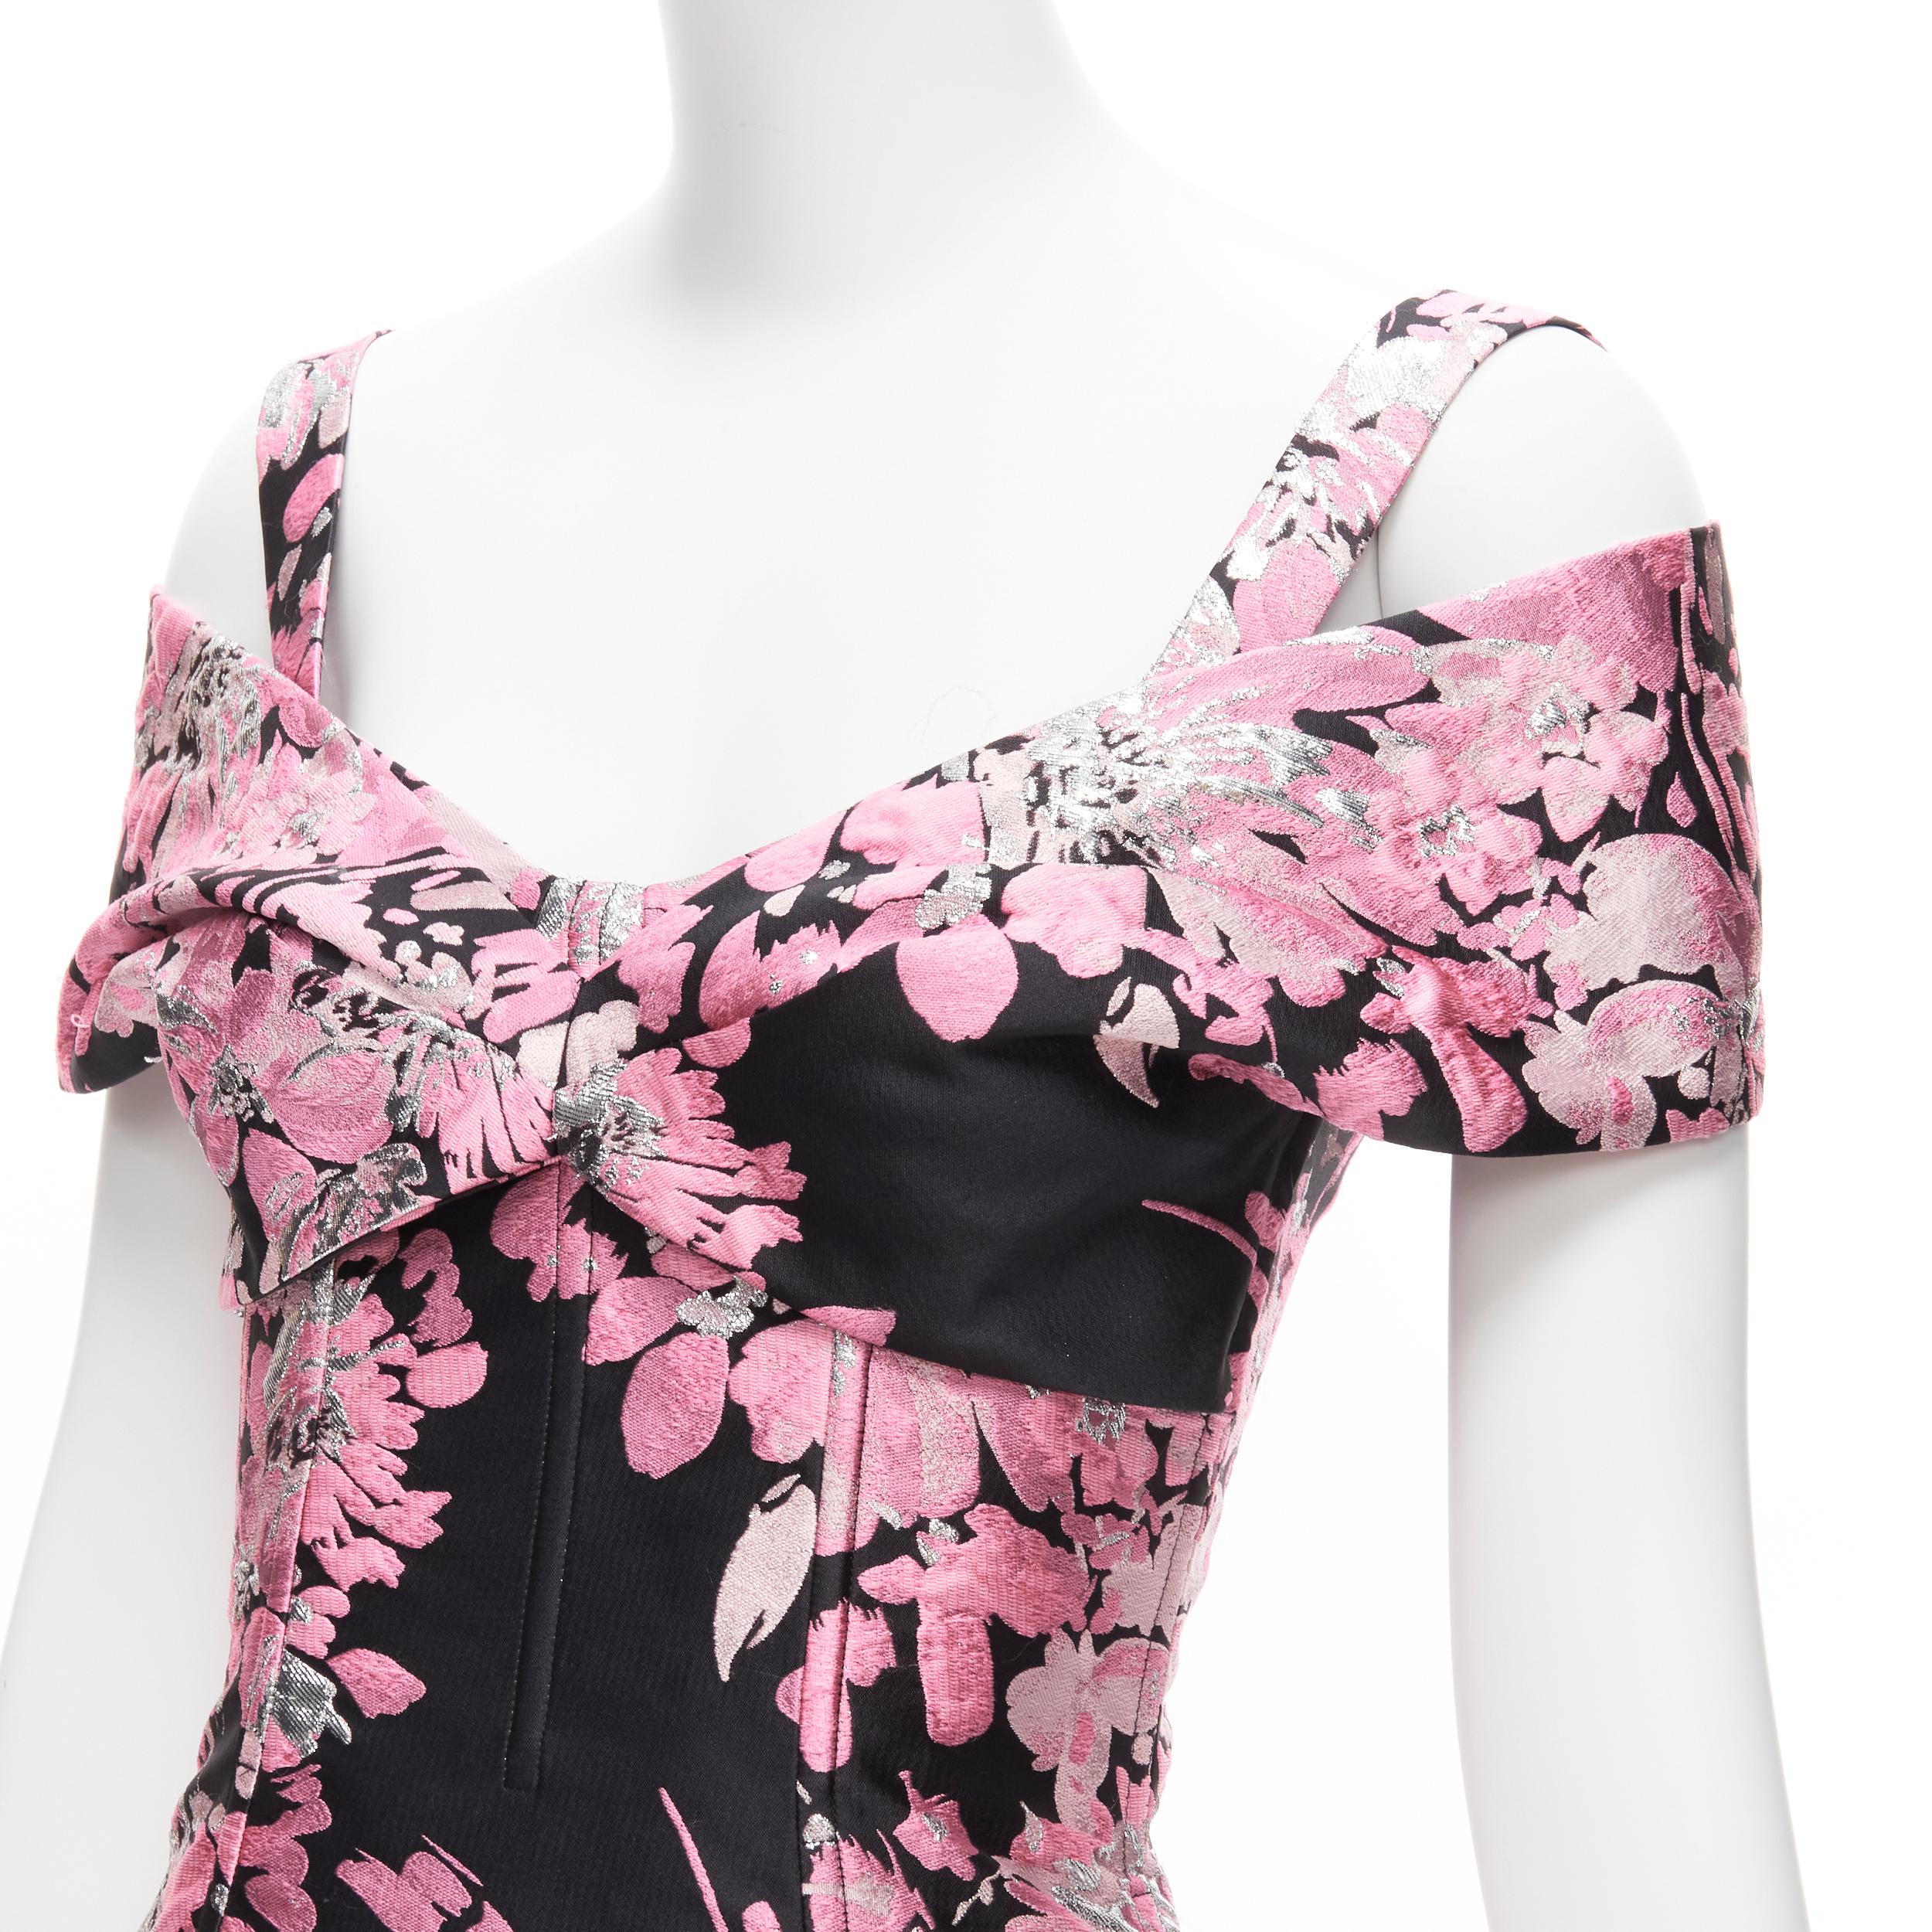 DOLCE GABBANA black pink floral jacquard off shoulder corsetted dress IT36 XXS
Reference: TGAS/D00314
Brand: Dolce Gabbana
Designer: Domenico Dolce and Stefano Gabbana
Material: Polyester, Blend
Color: Black, Pink
Pattern: Brocade
Closure: